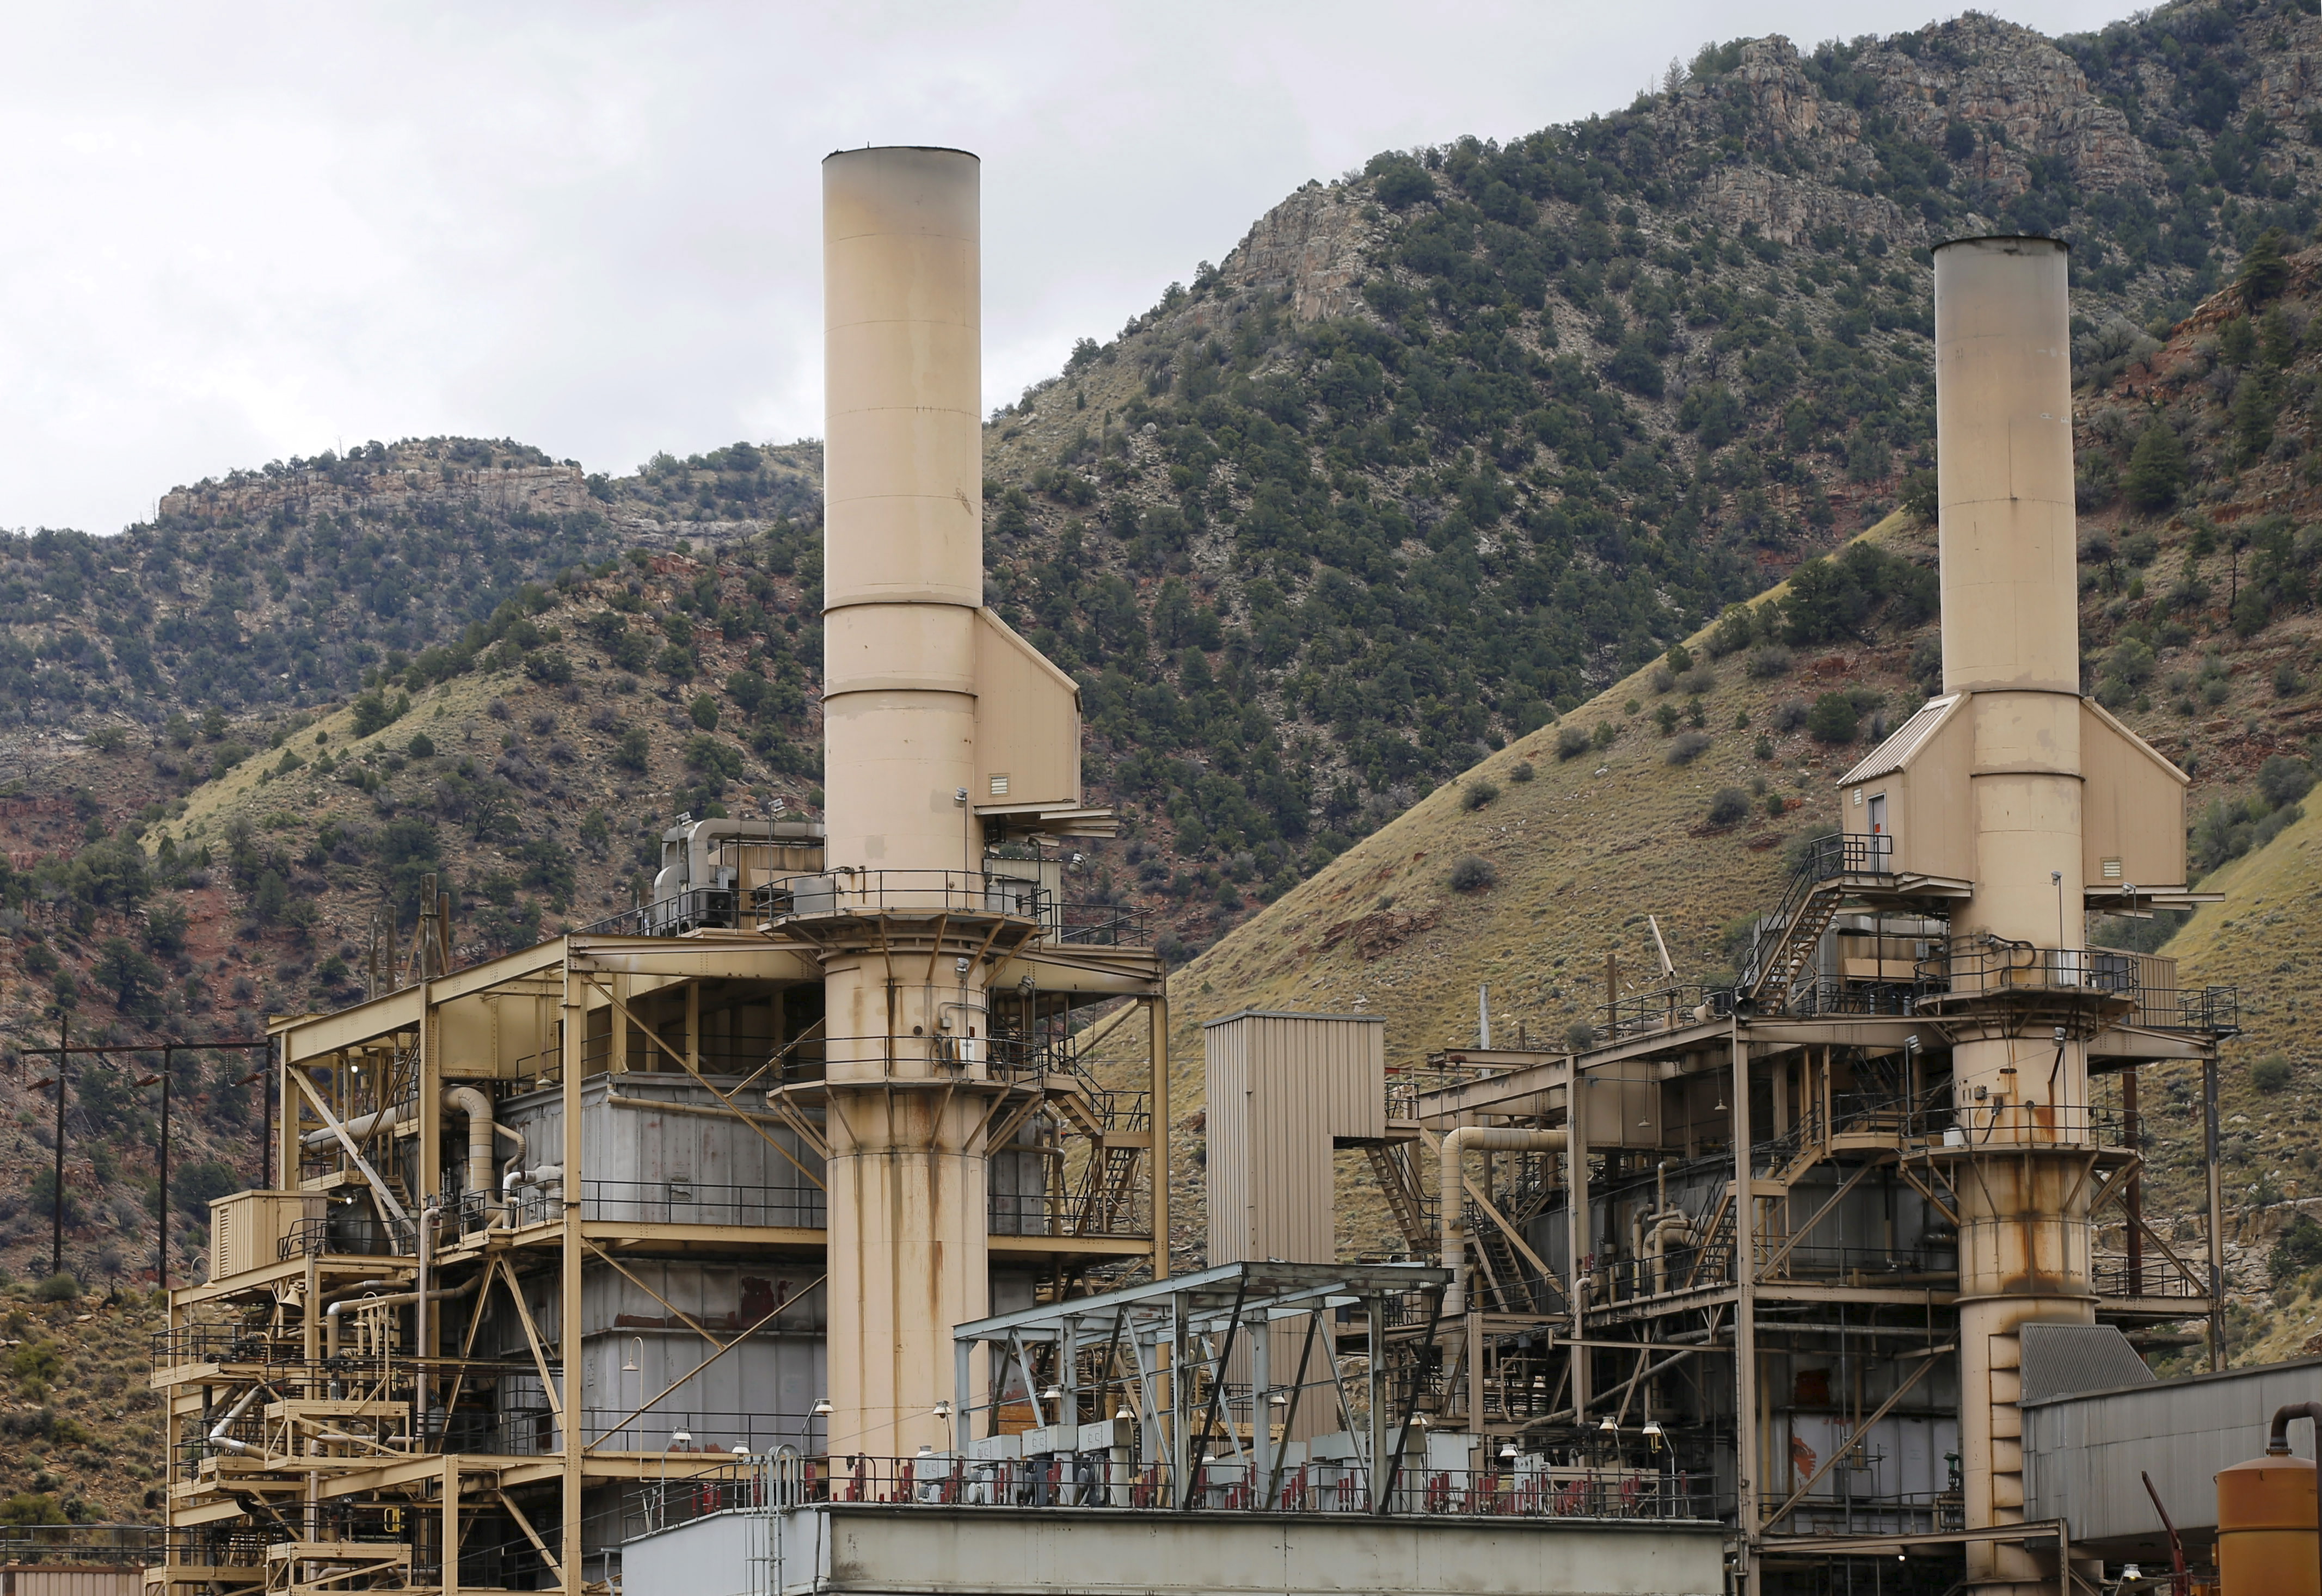 Smoke no longer rises out of the smokestacks at the coal-fired Castle Gate Power Plant outside Helper, Utah, Aug. 3, 2015. The plant was closed in anticipation of new EPA regulations. (George Frey—Reuters)